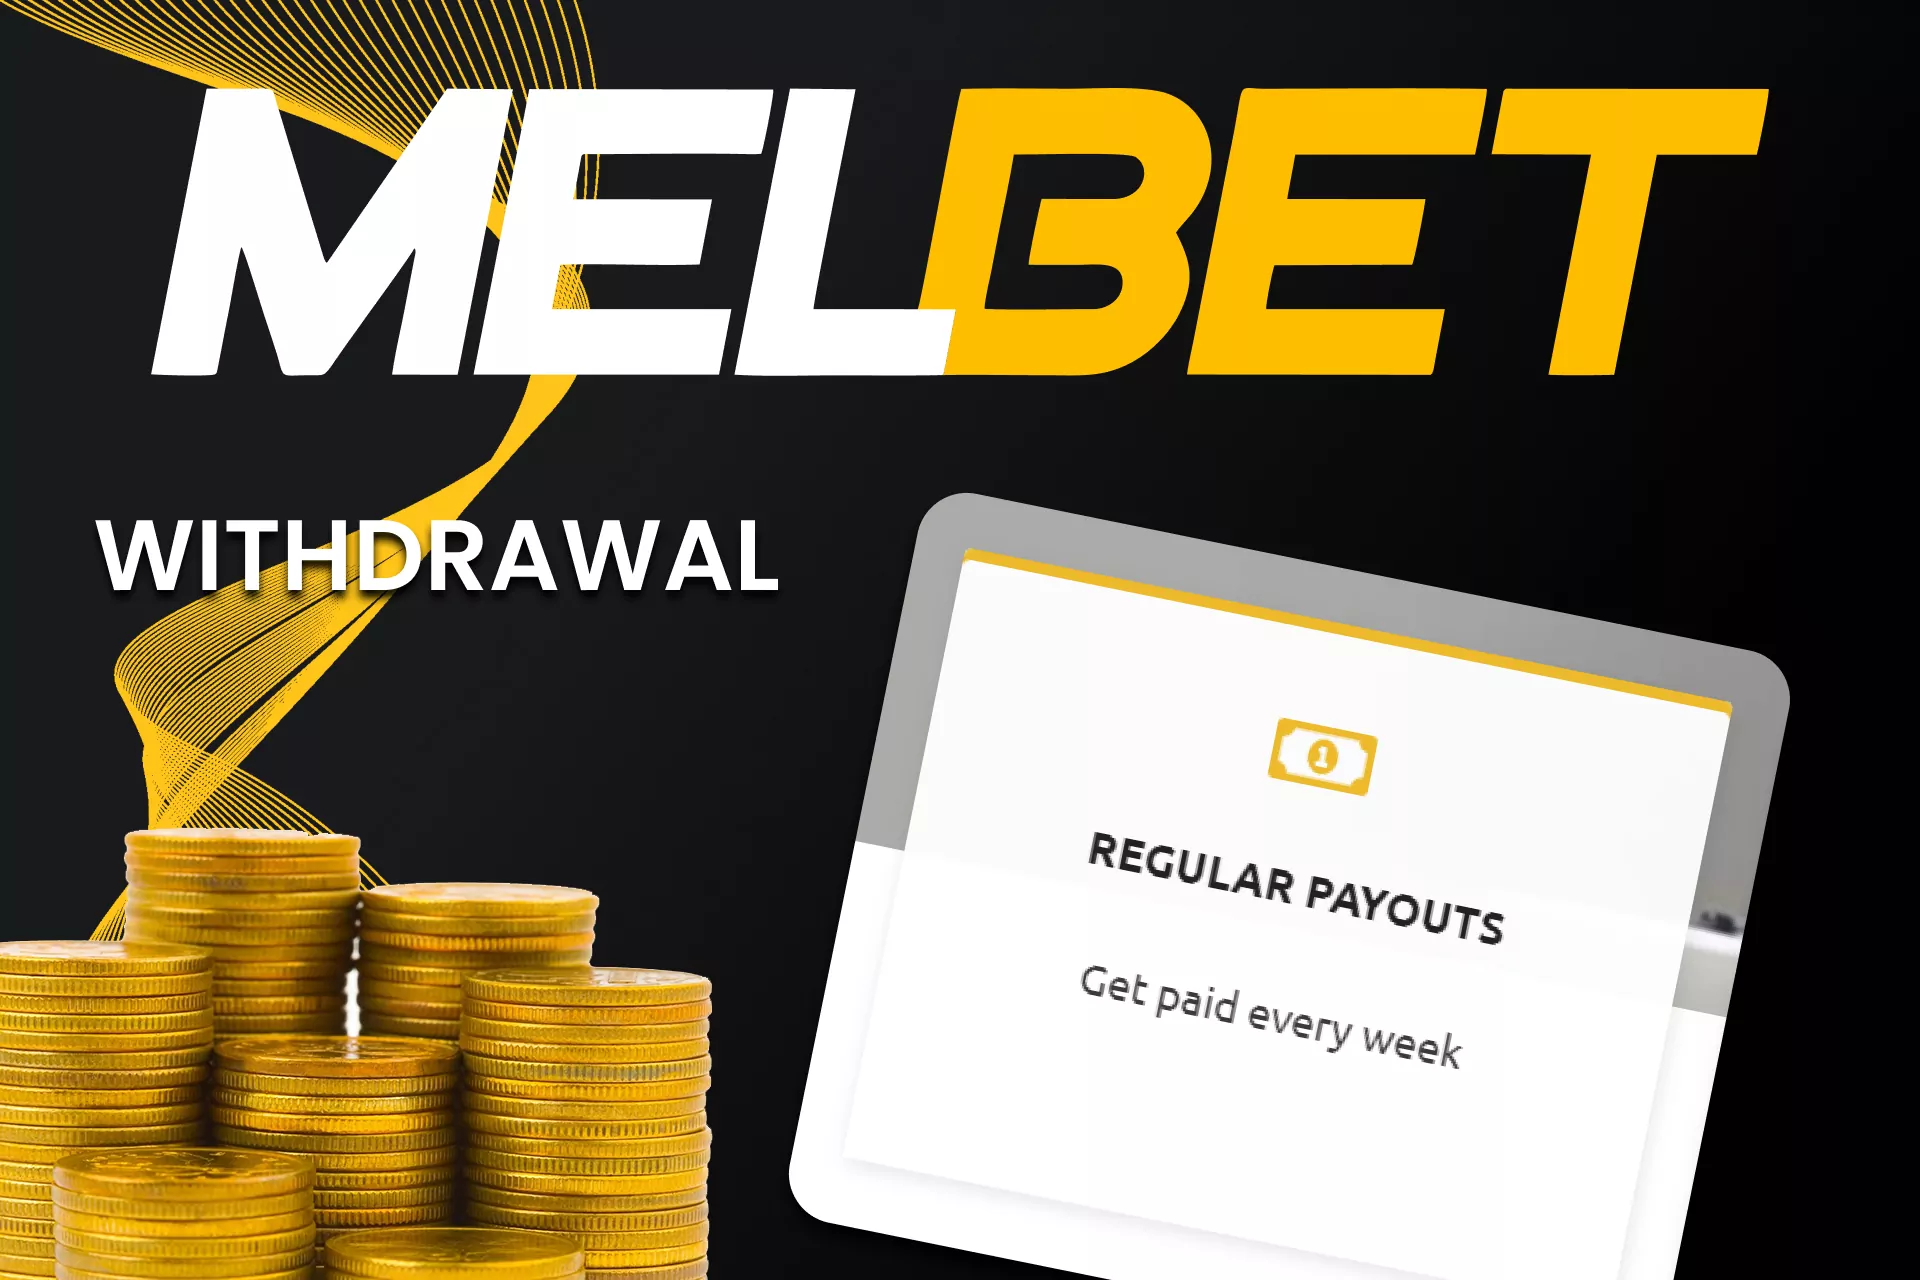 Withdraw funds received from the affiliate program Melbet.